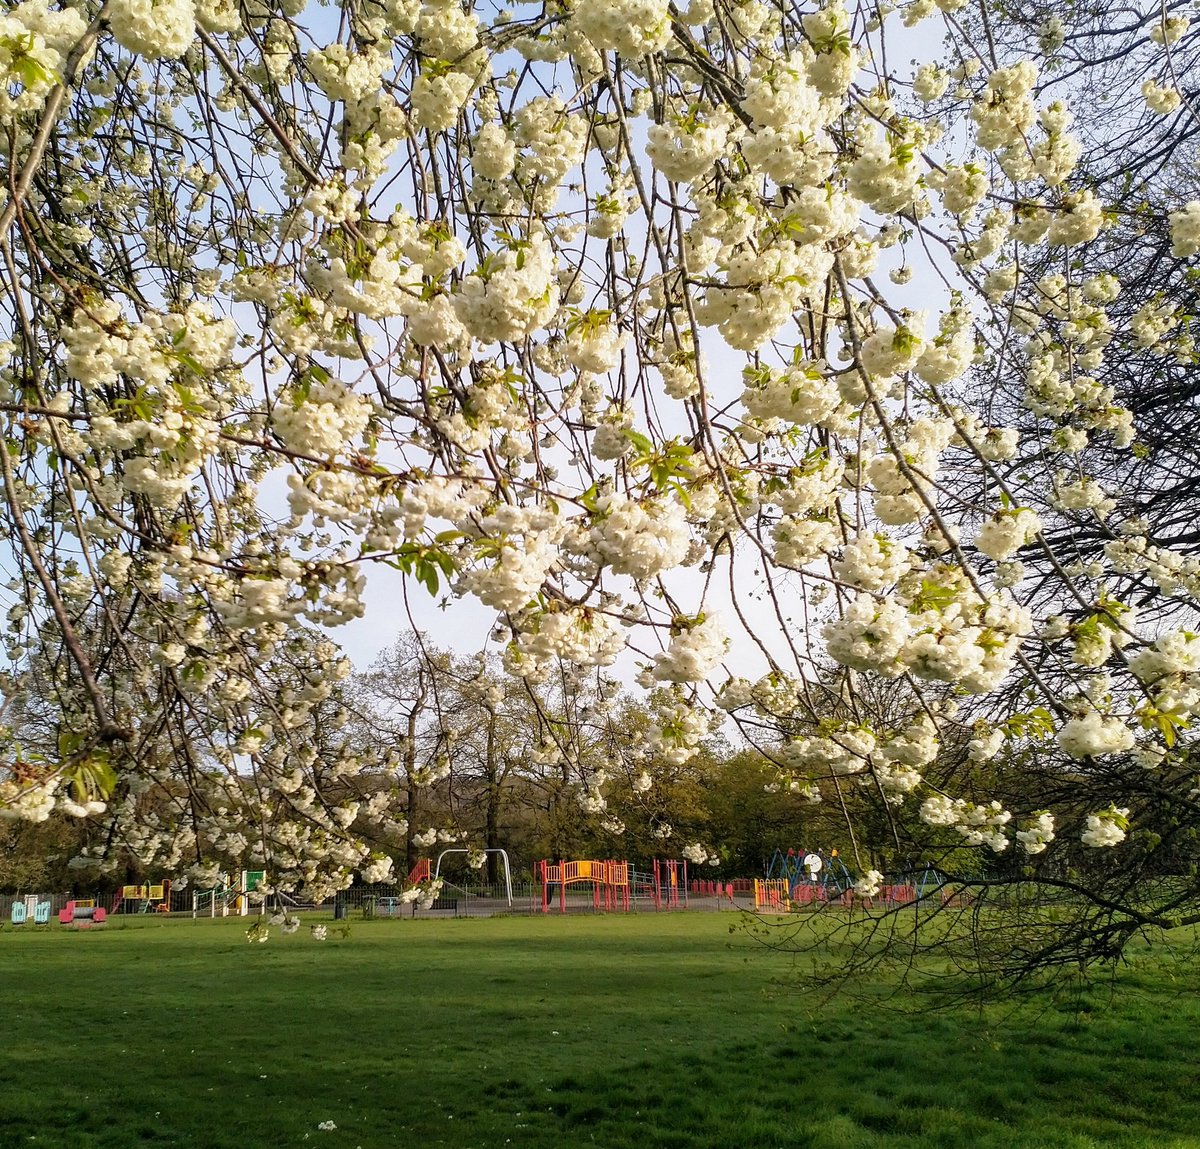 And it's ' Good morning ' from a glorious and Spring looking #ElthamParkSouth @SEninemag @ThisisEltham @ElthamCafe @laurendingsdale #SE9 #Eltham